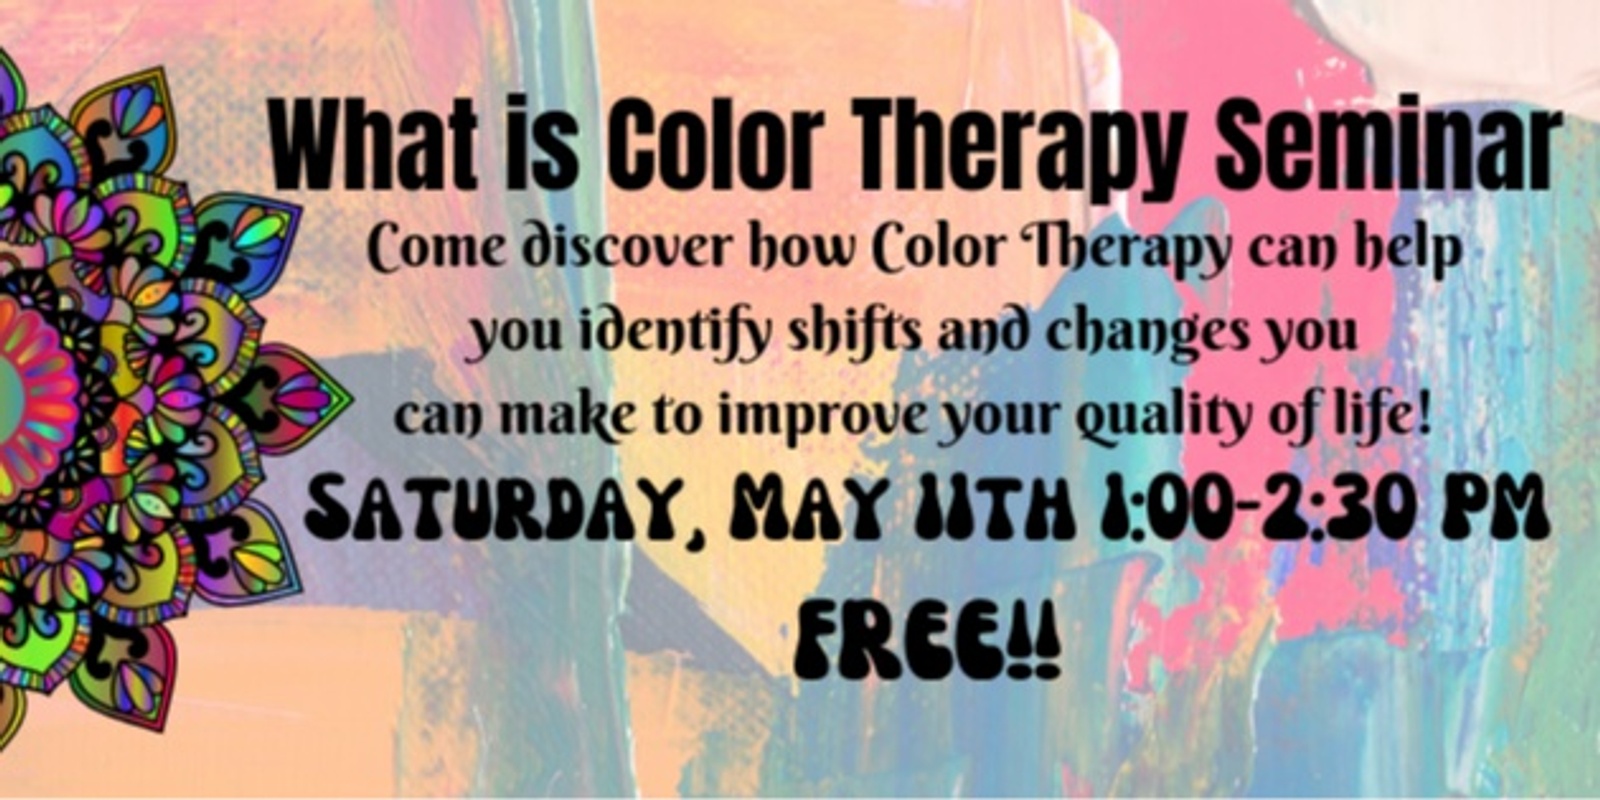 Banner image for What is Color Therapy Seminar